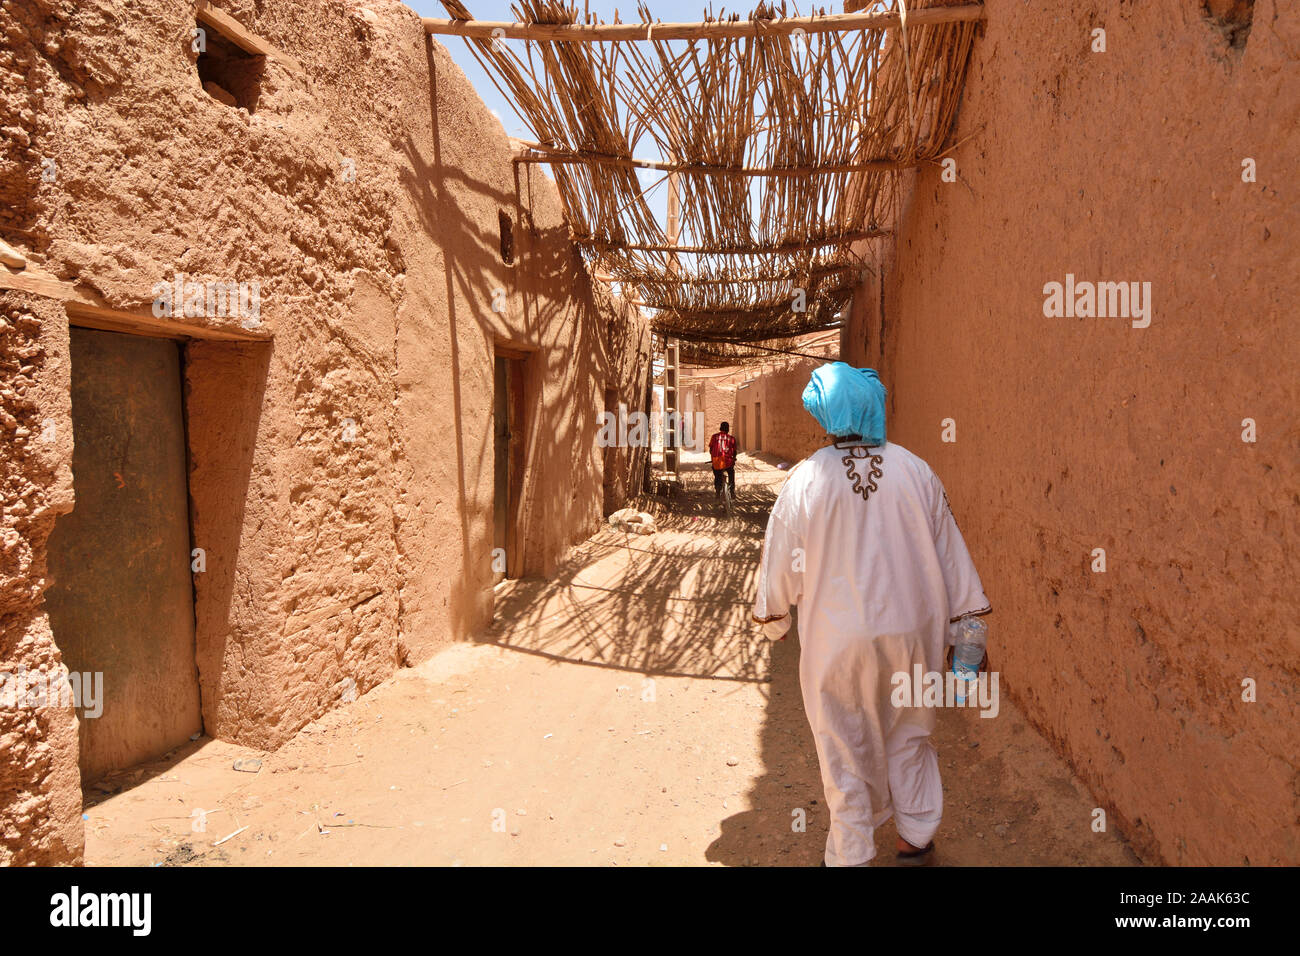 The ancient kasbah of Tamegroute. Zagora region, Draa Valley. Morocco Stock Photo